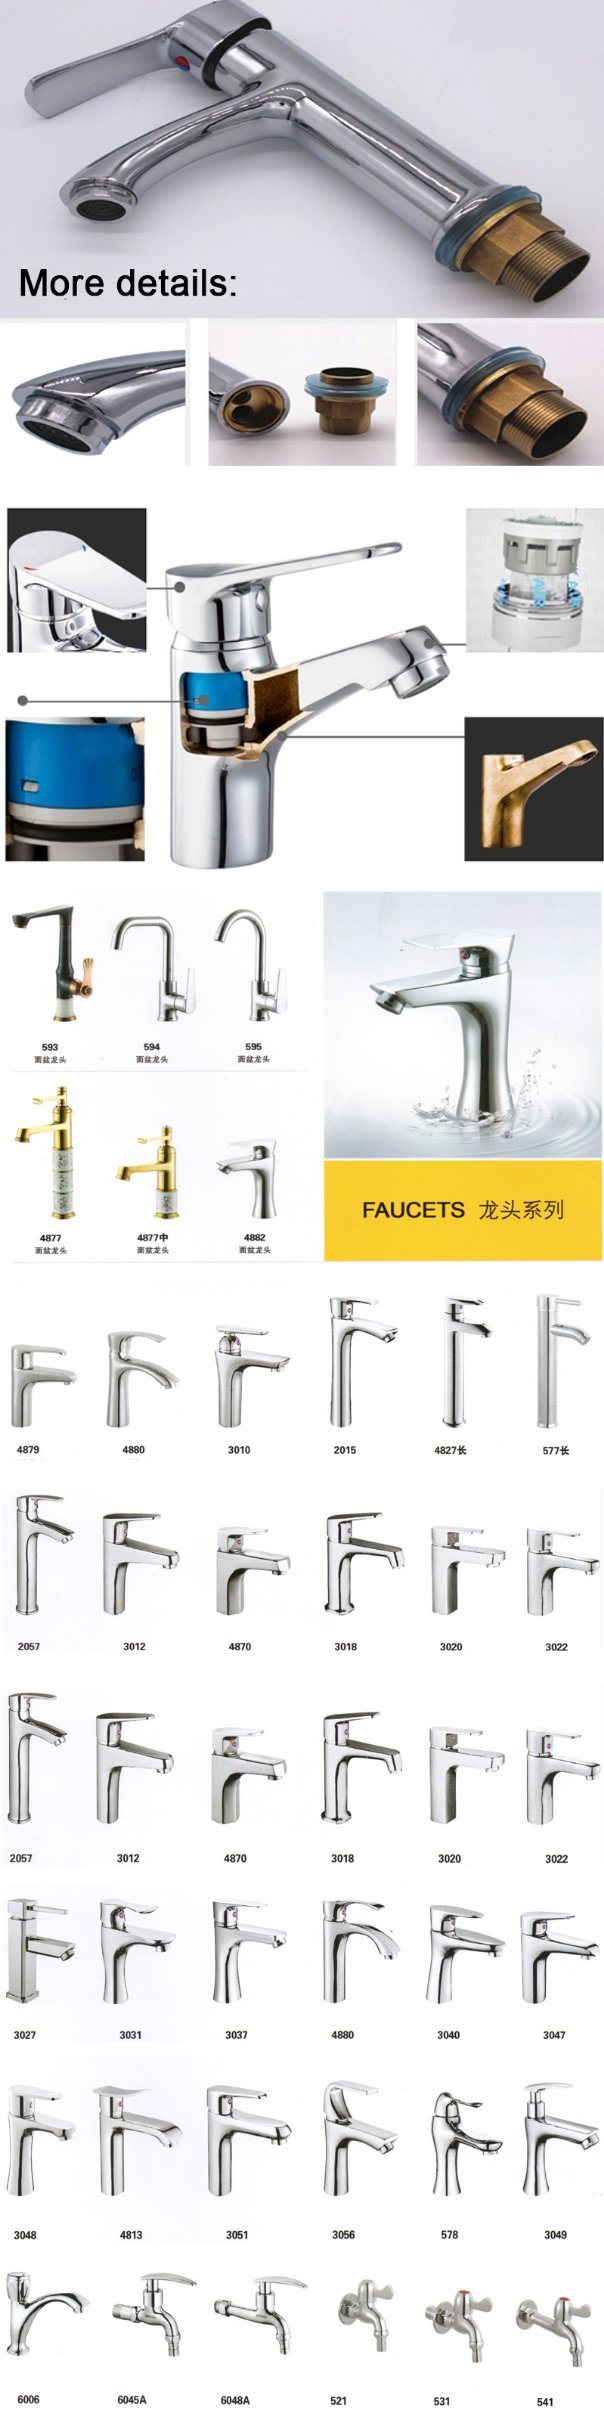 Hotsale Double Handle Basin Faucet Made in China